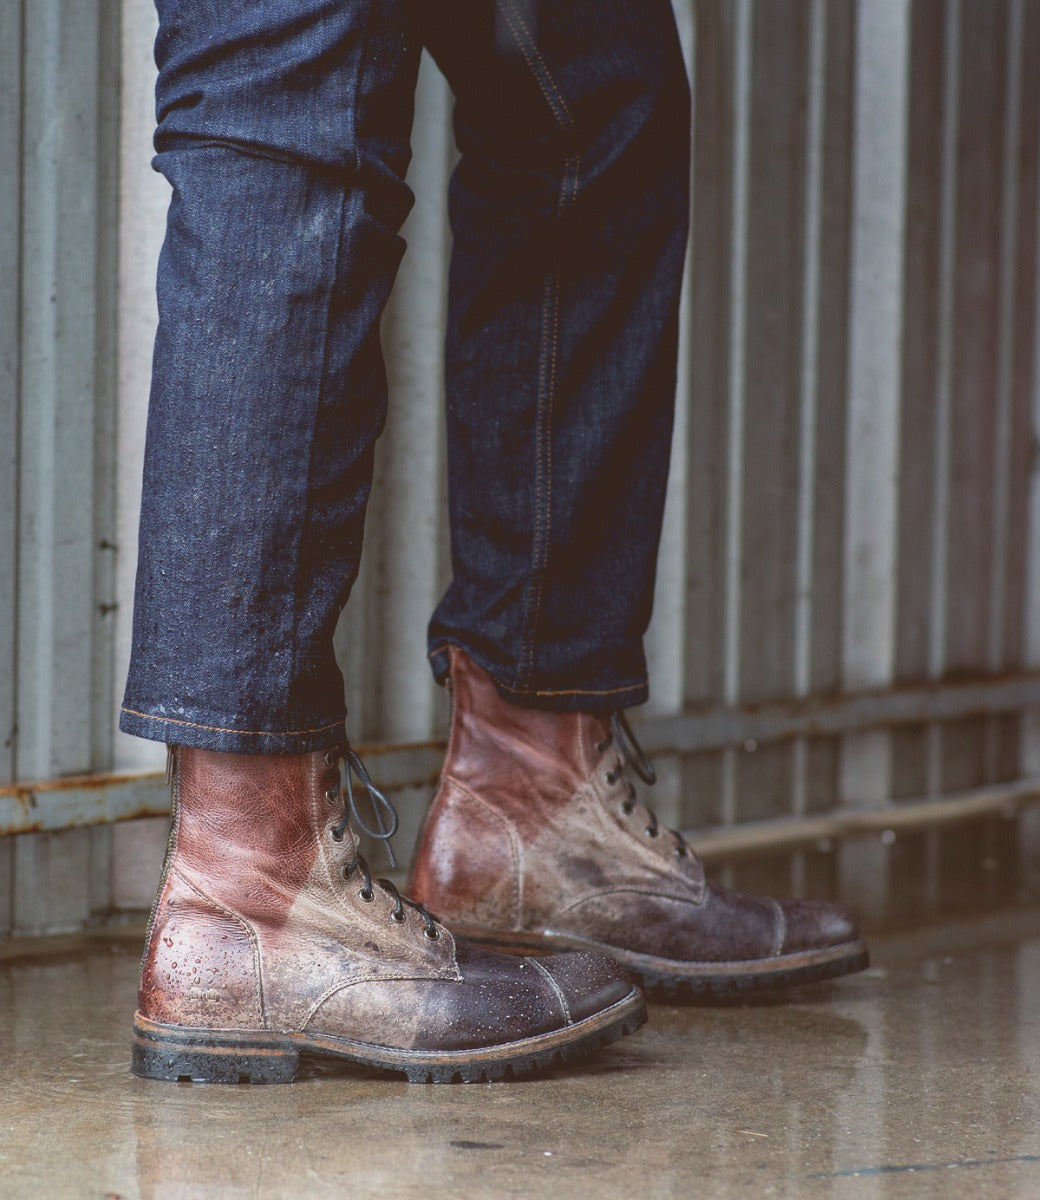 A person wearing rolled-up Protege Trek jeans and Bed Stu combat style boots stands on a wet surface near a corrugated metal wall.